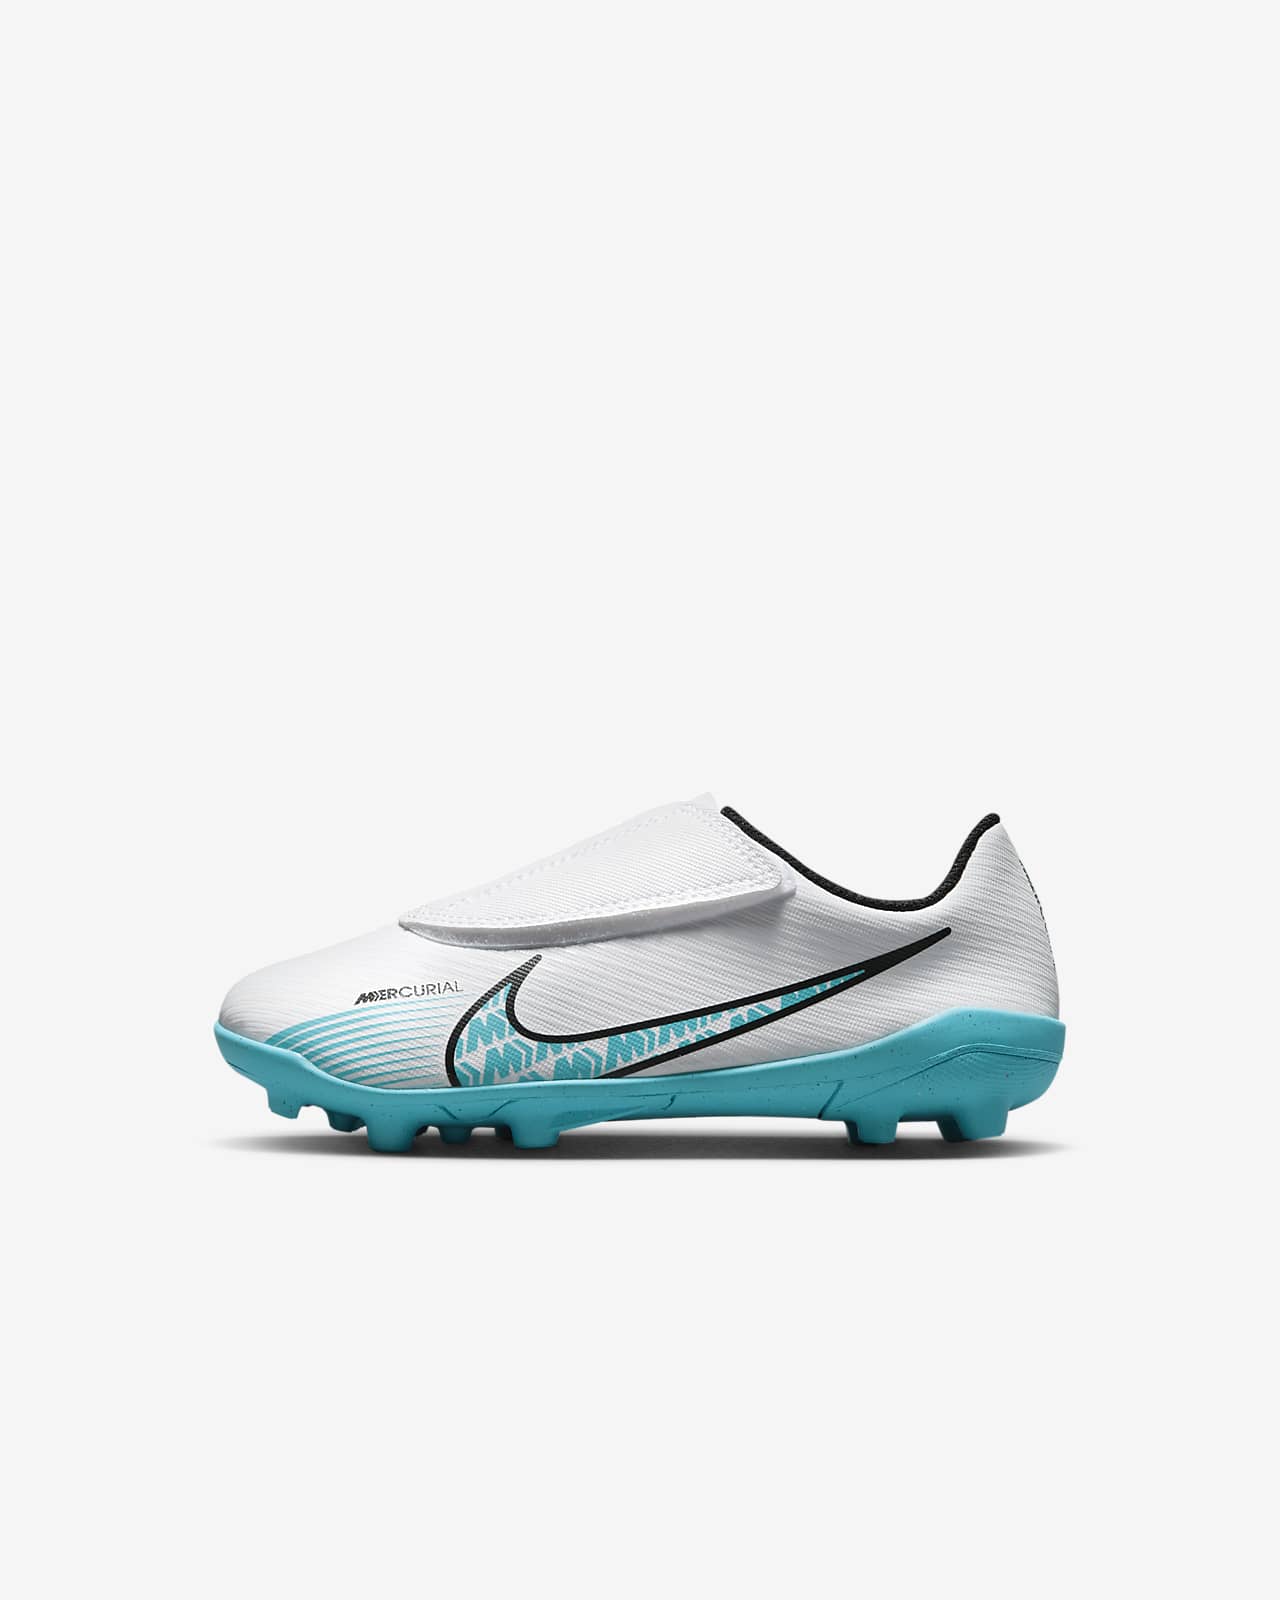 Football Boots & Shoes. Nike ID